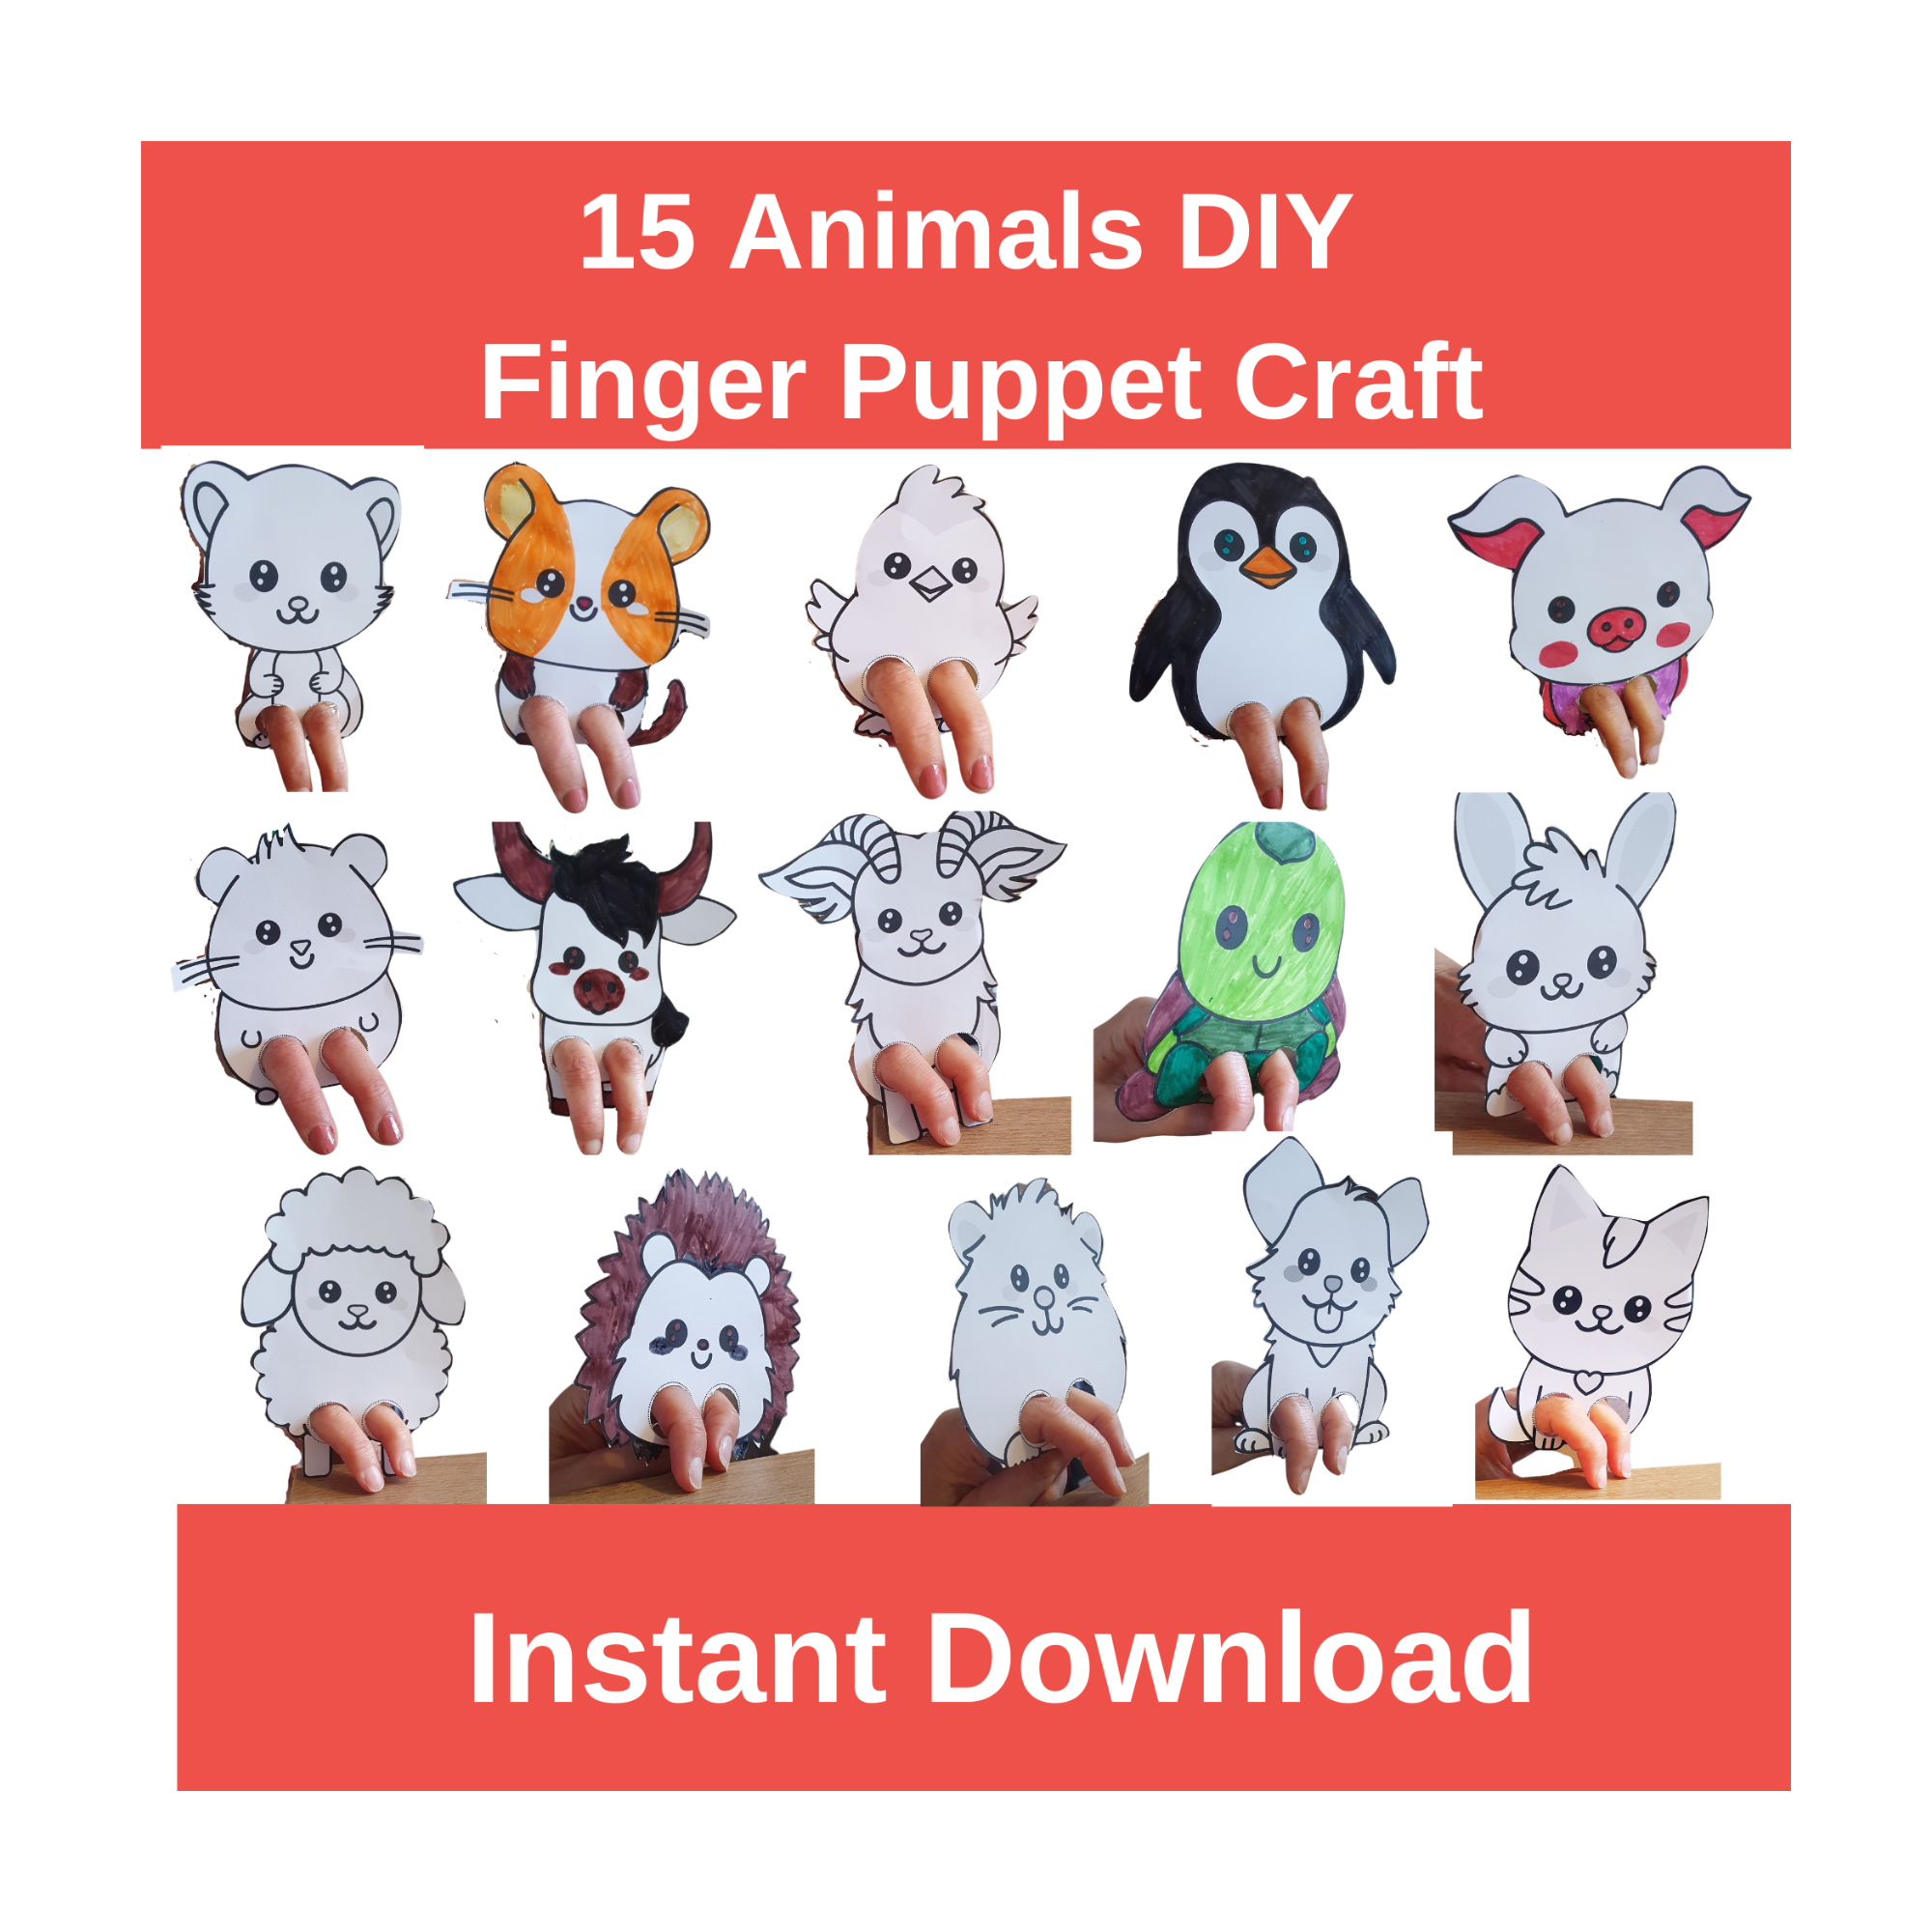 How to Make 15 Animal DIY Finger Puppets